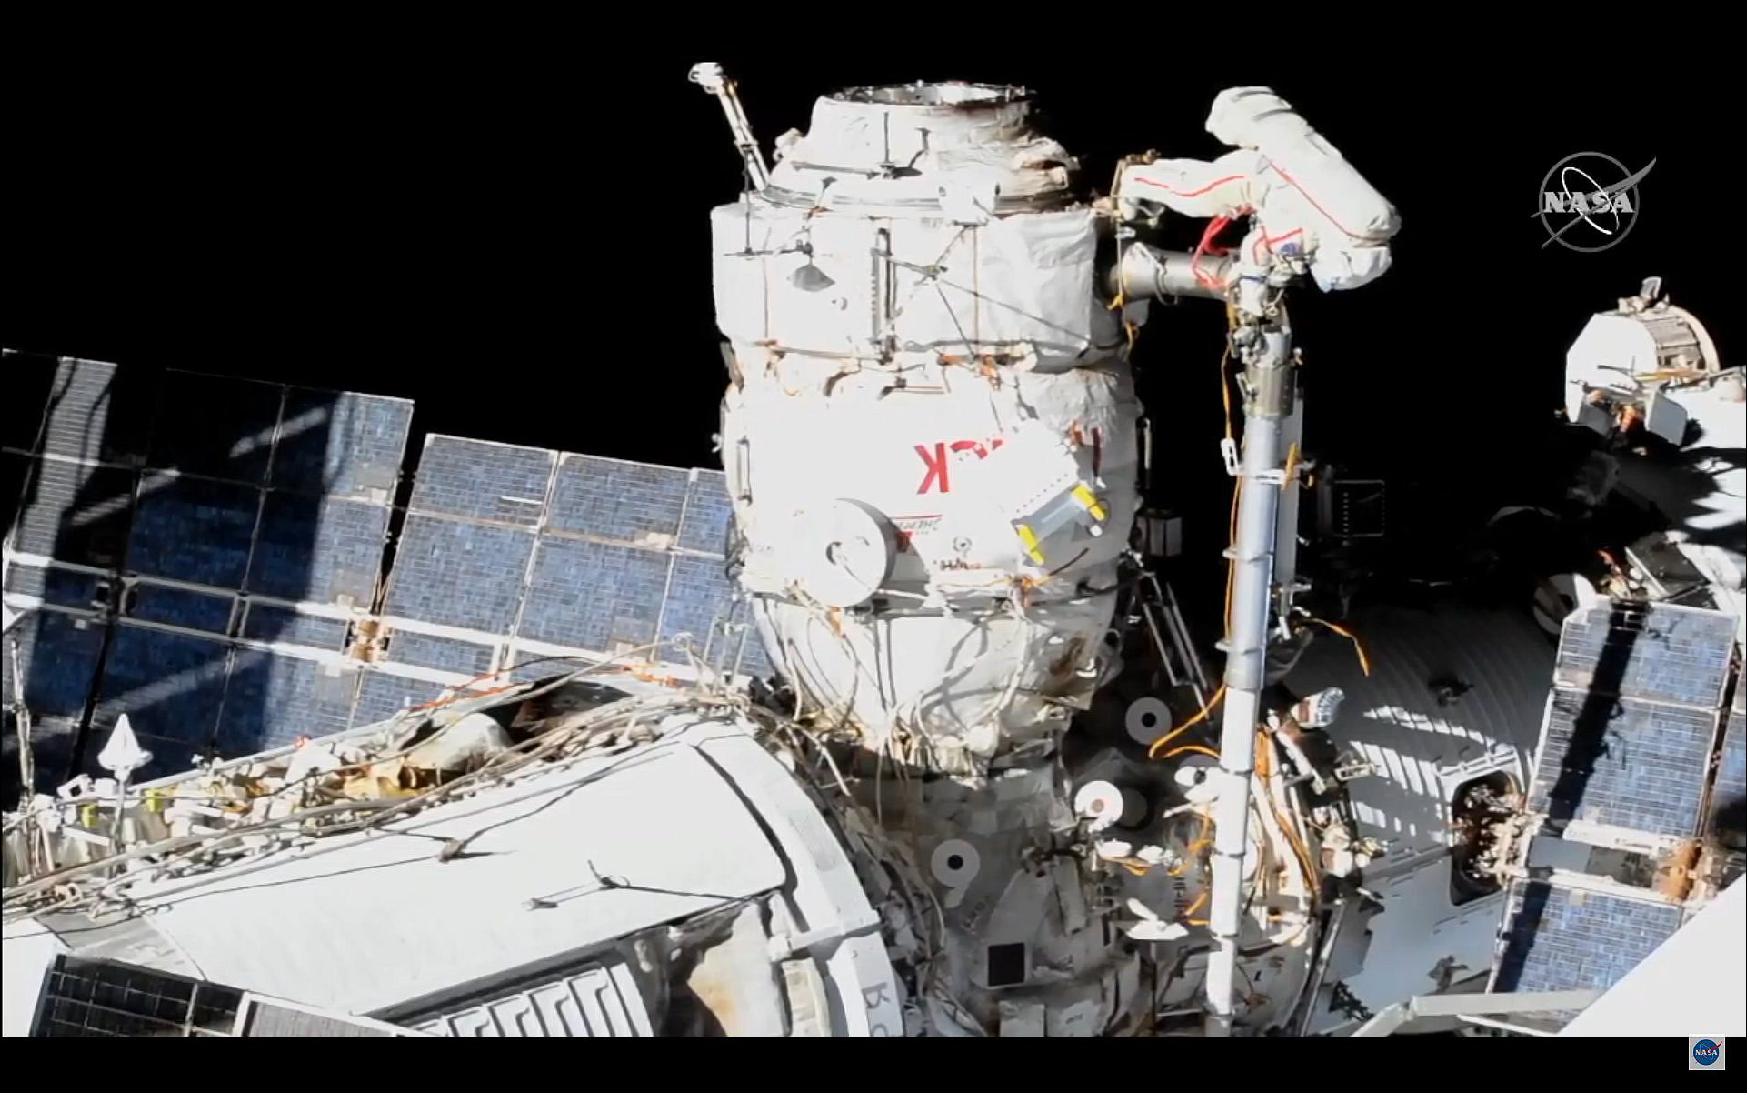 Figure 2: Outside the ISS, Oleg Novitsky and Pyotr Dubrov have completed a near 7 hour EVA/spacewalk, to finalize external preparations for the removal to the Pirs docking compartment that has served the Station for nearly 20 years (image credit: NASA)